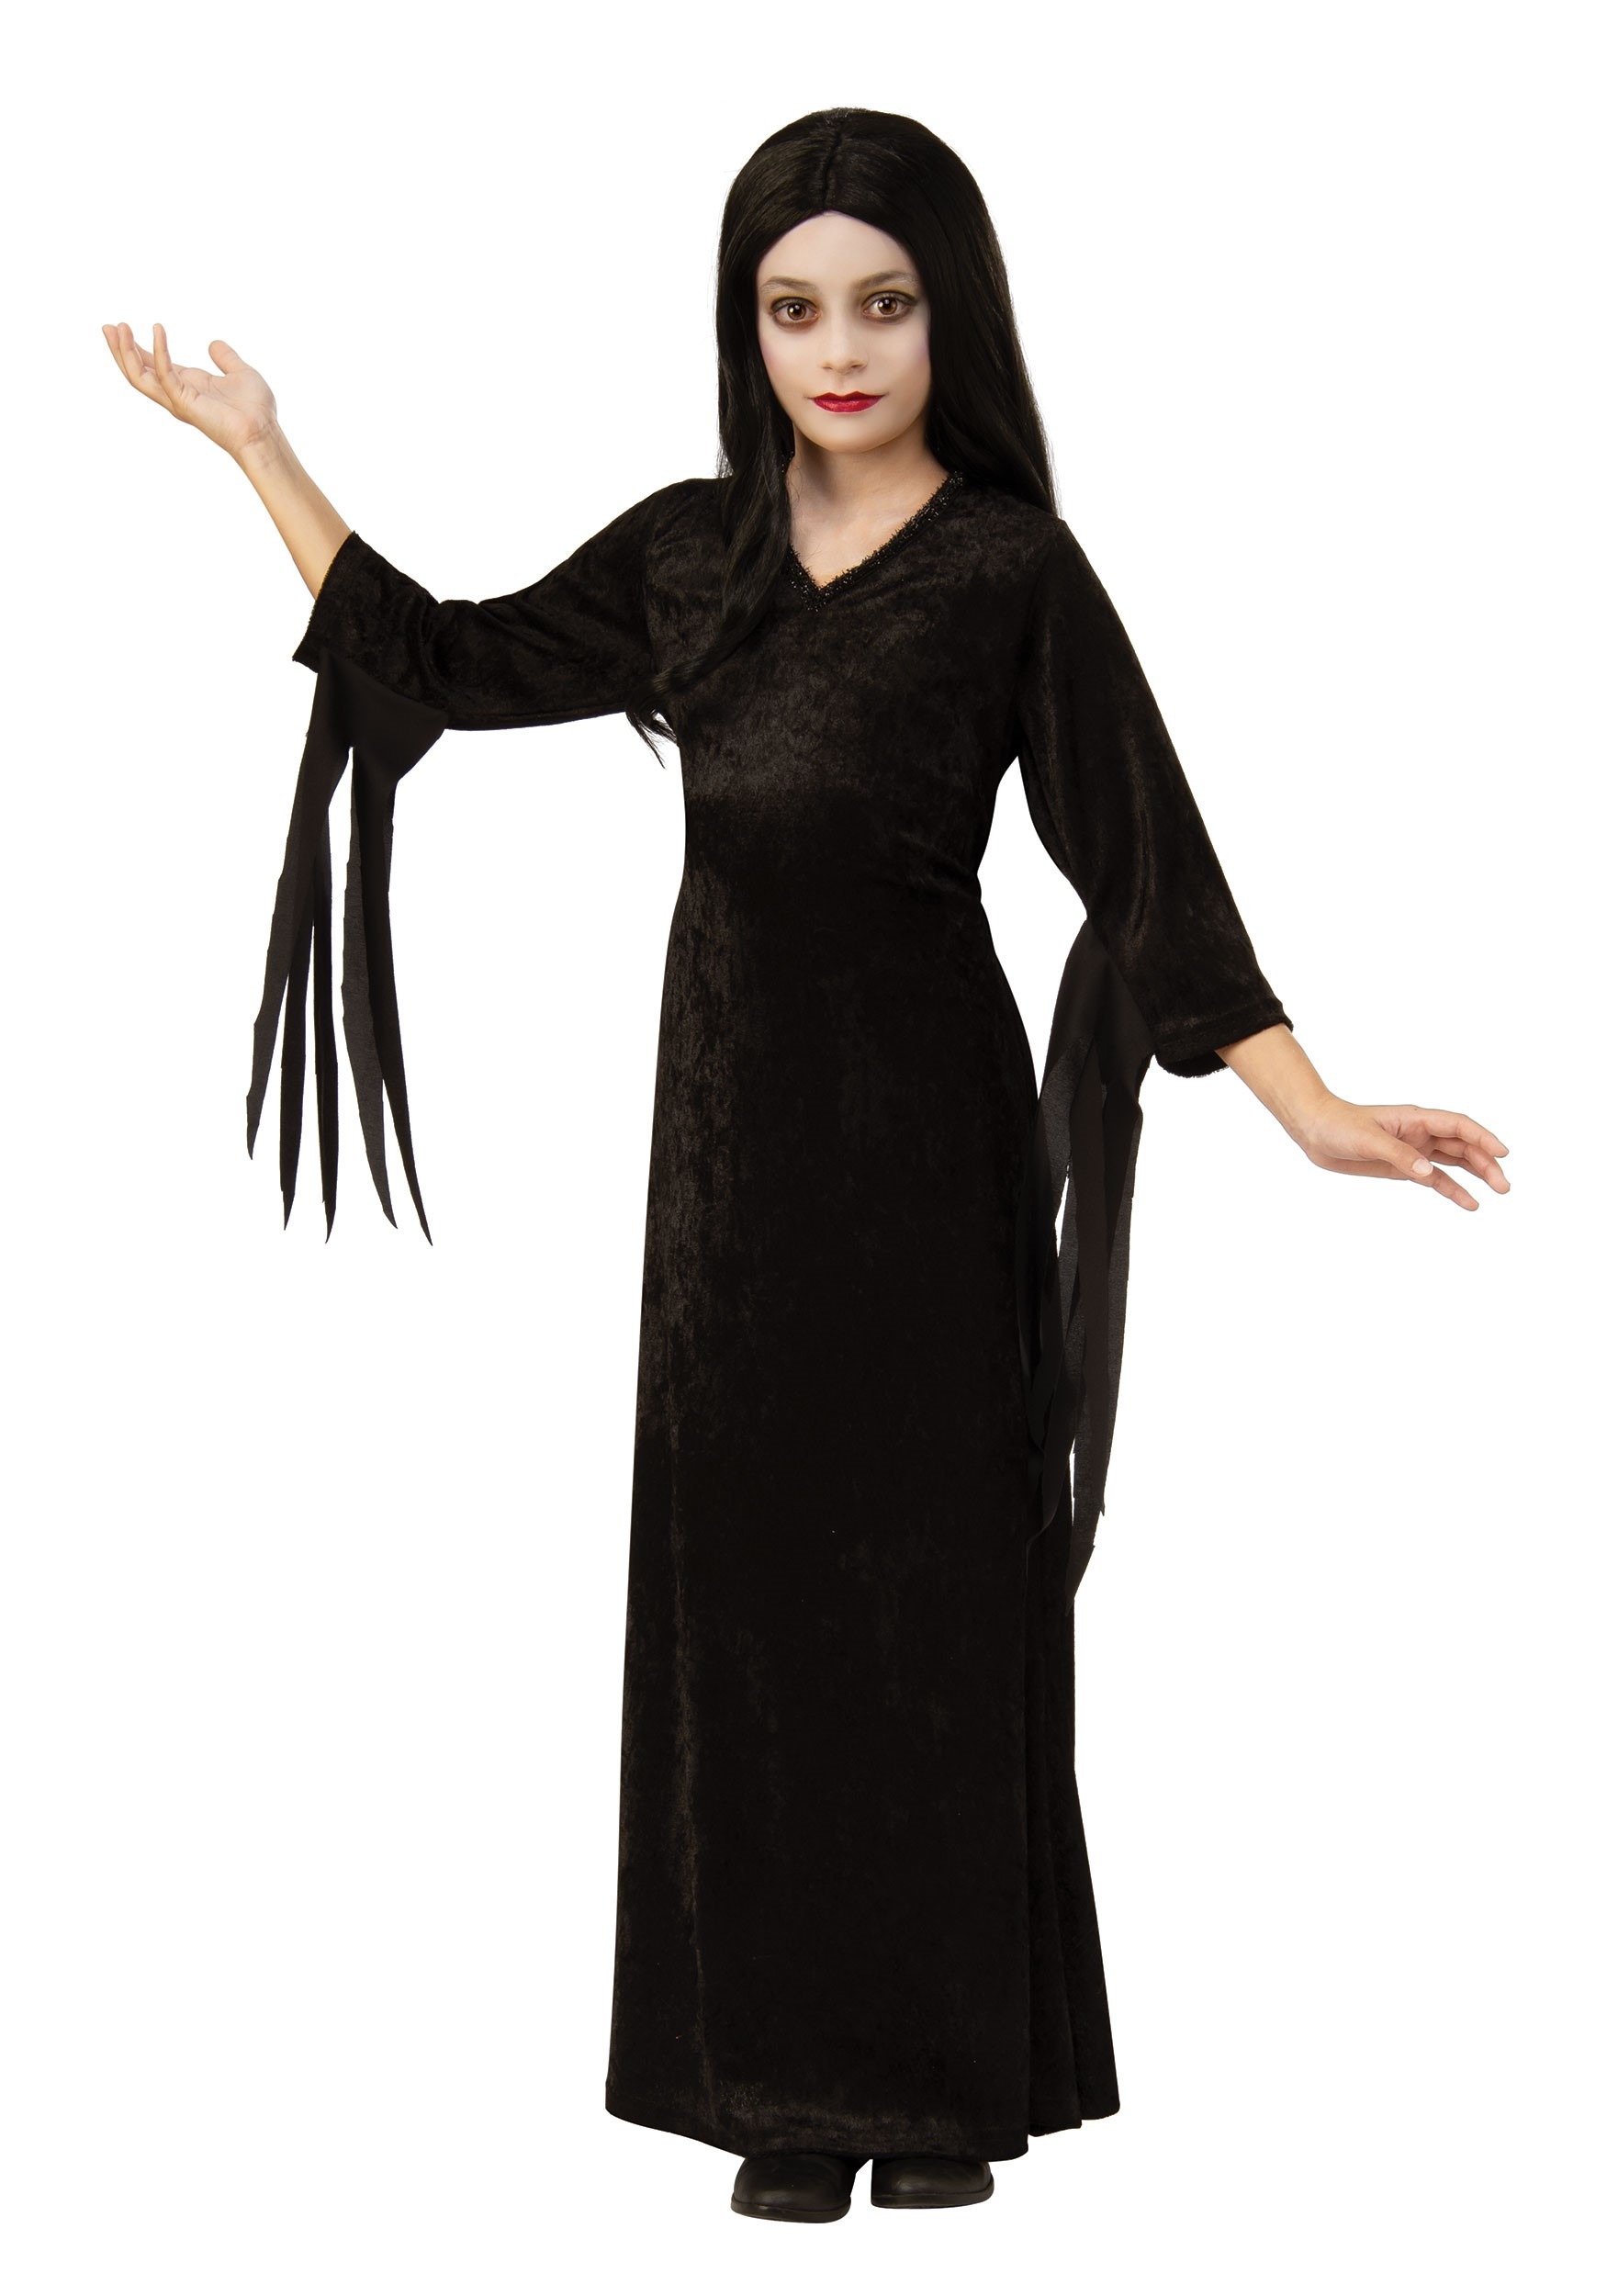 The Addams Family Morticia Costume for Kids